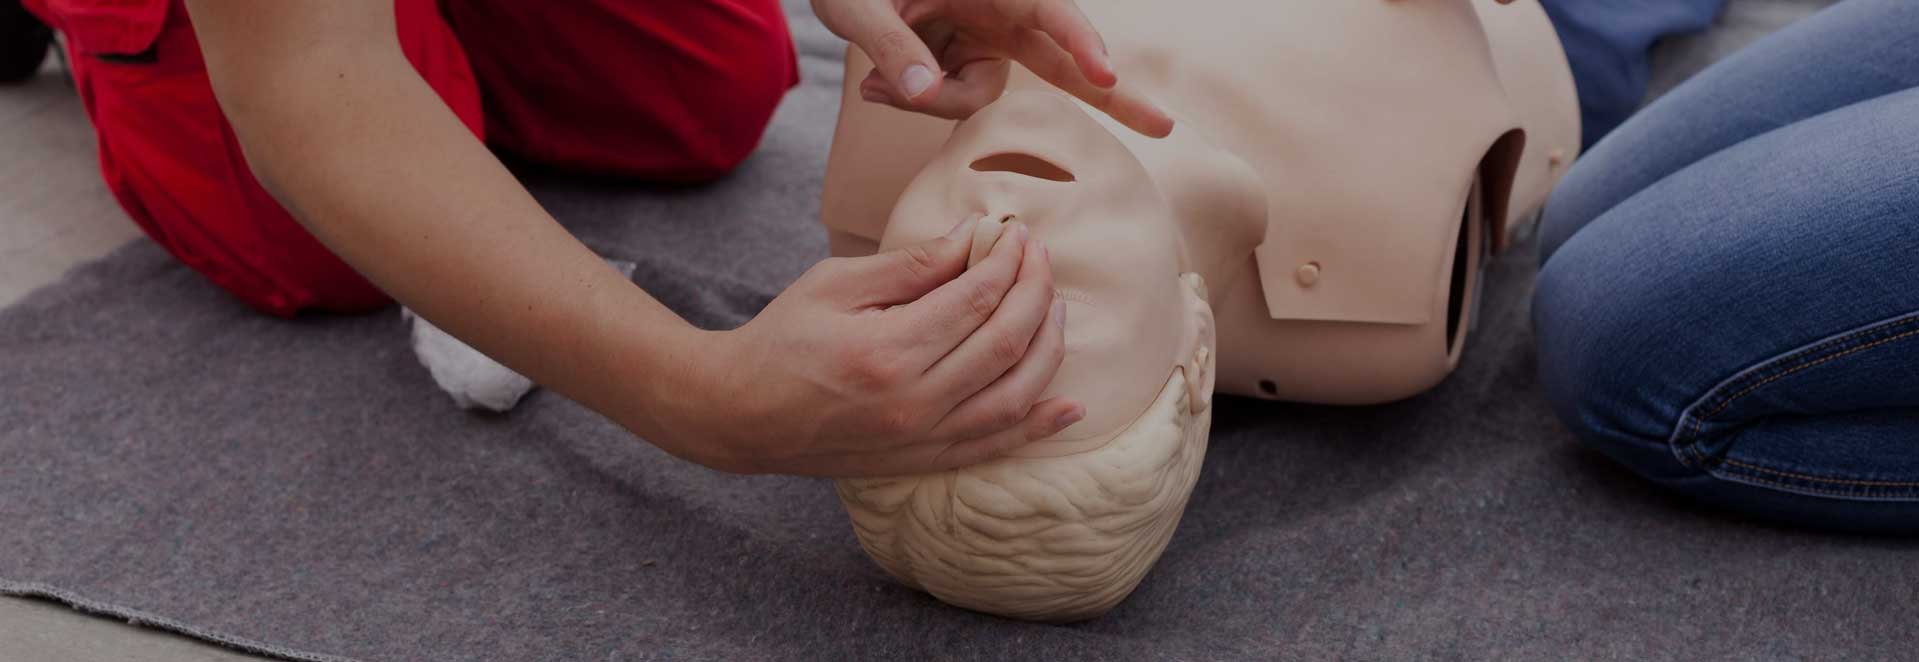 hltaid006 provide advanced first aid